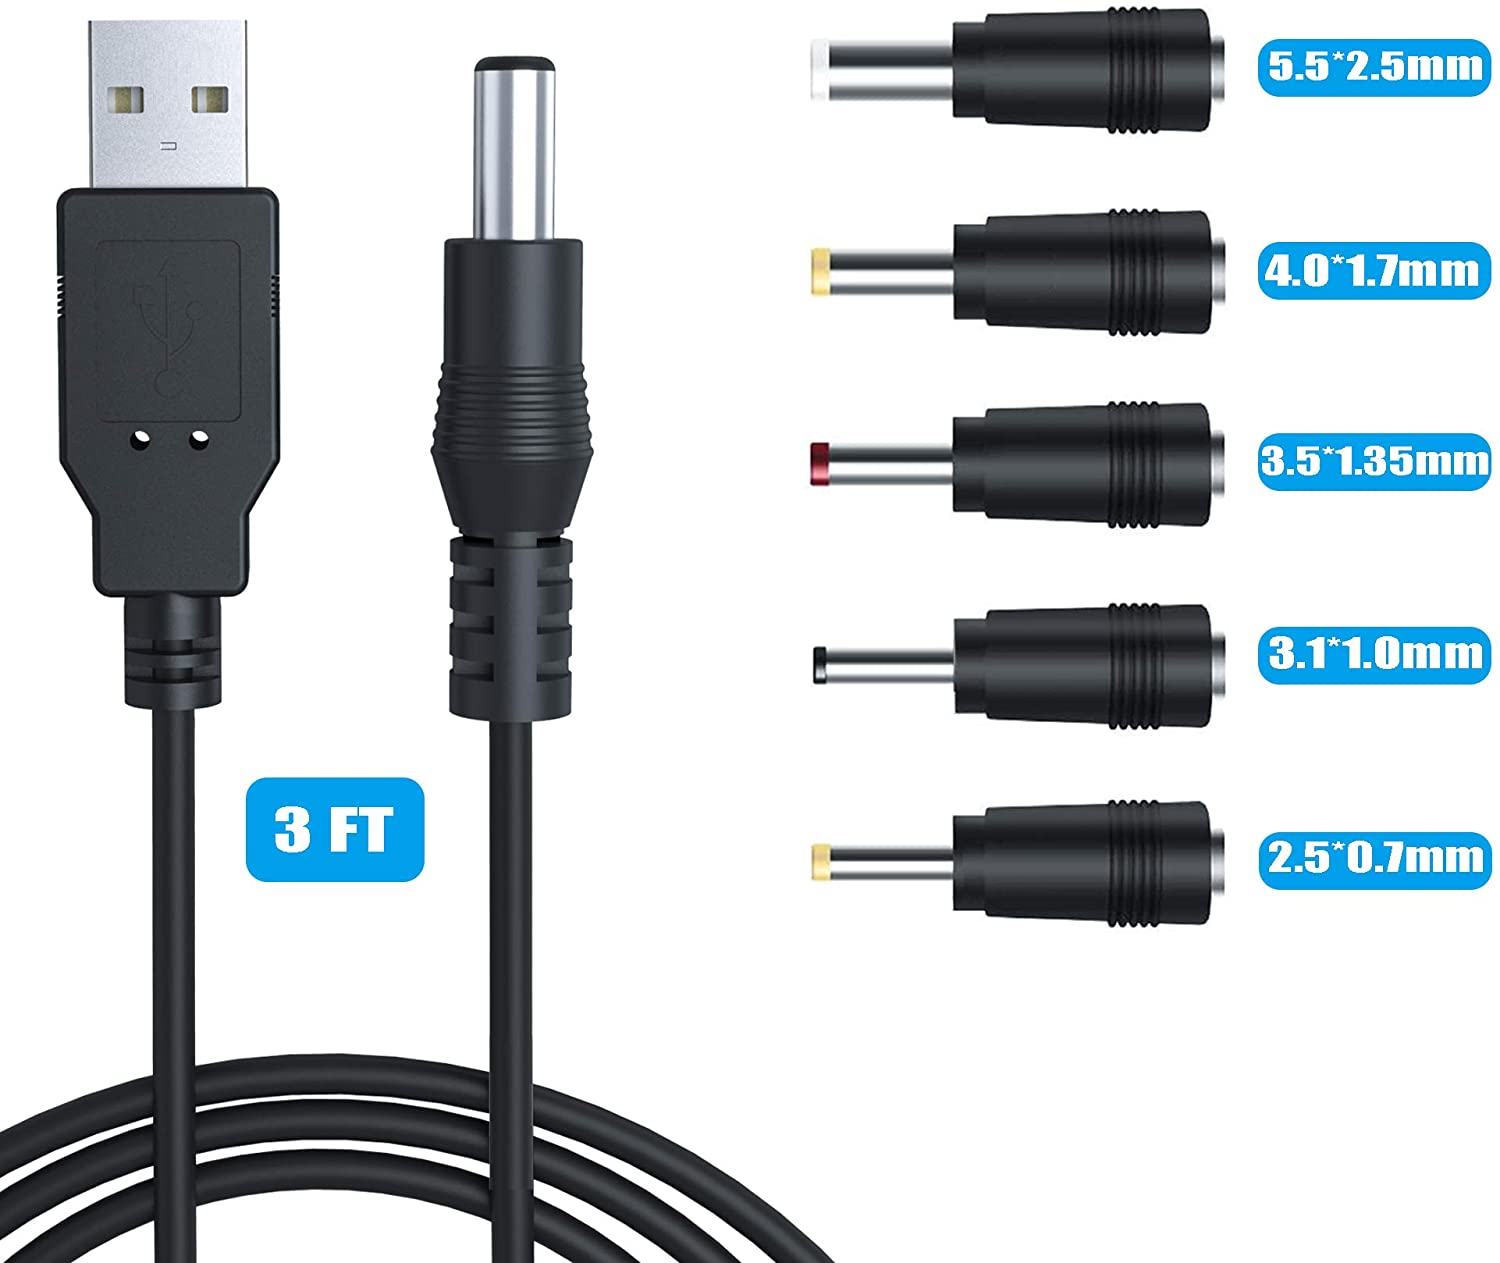 5V DC 5.5 2.1mm Charging Cable Power Cord, USB to DC Power Cable